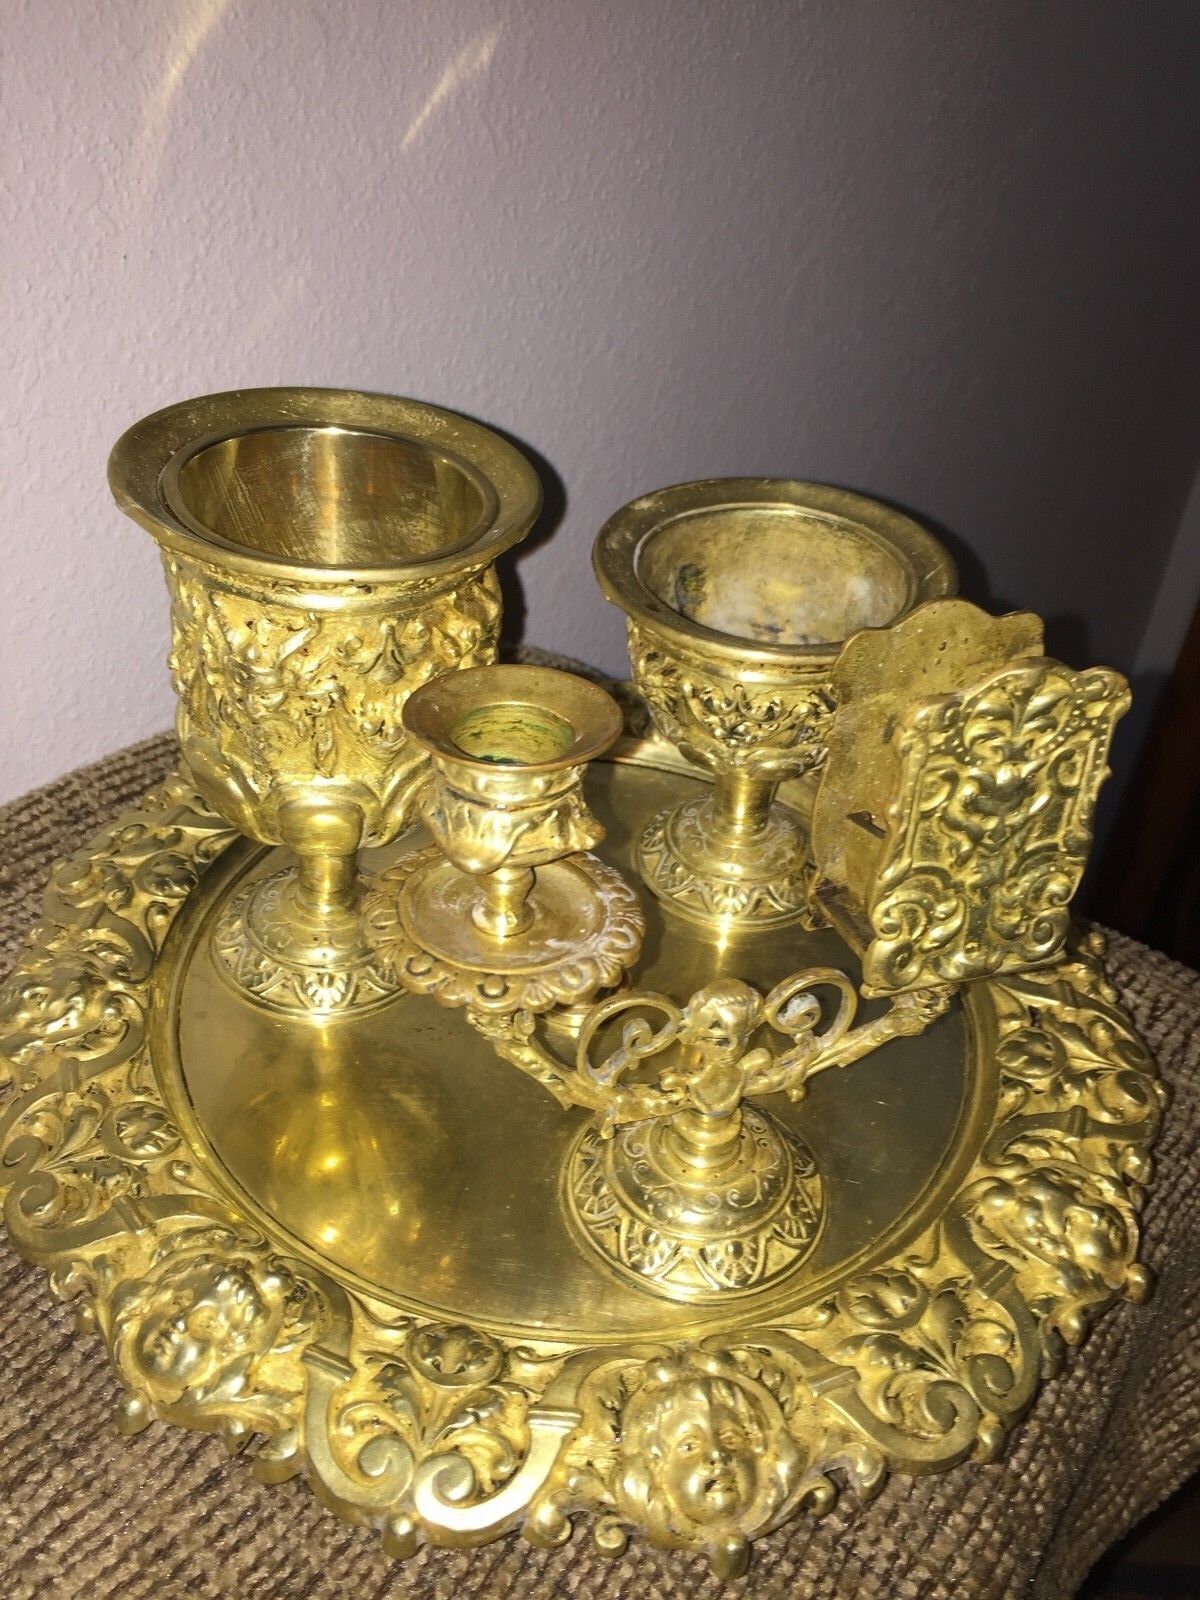 ANTIQUE ORNATE BRASS INKWELL DESK SET WITH TRAY ALL ATTACHED 1880s